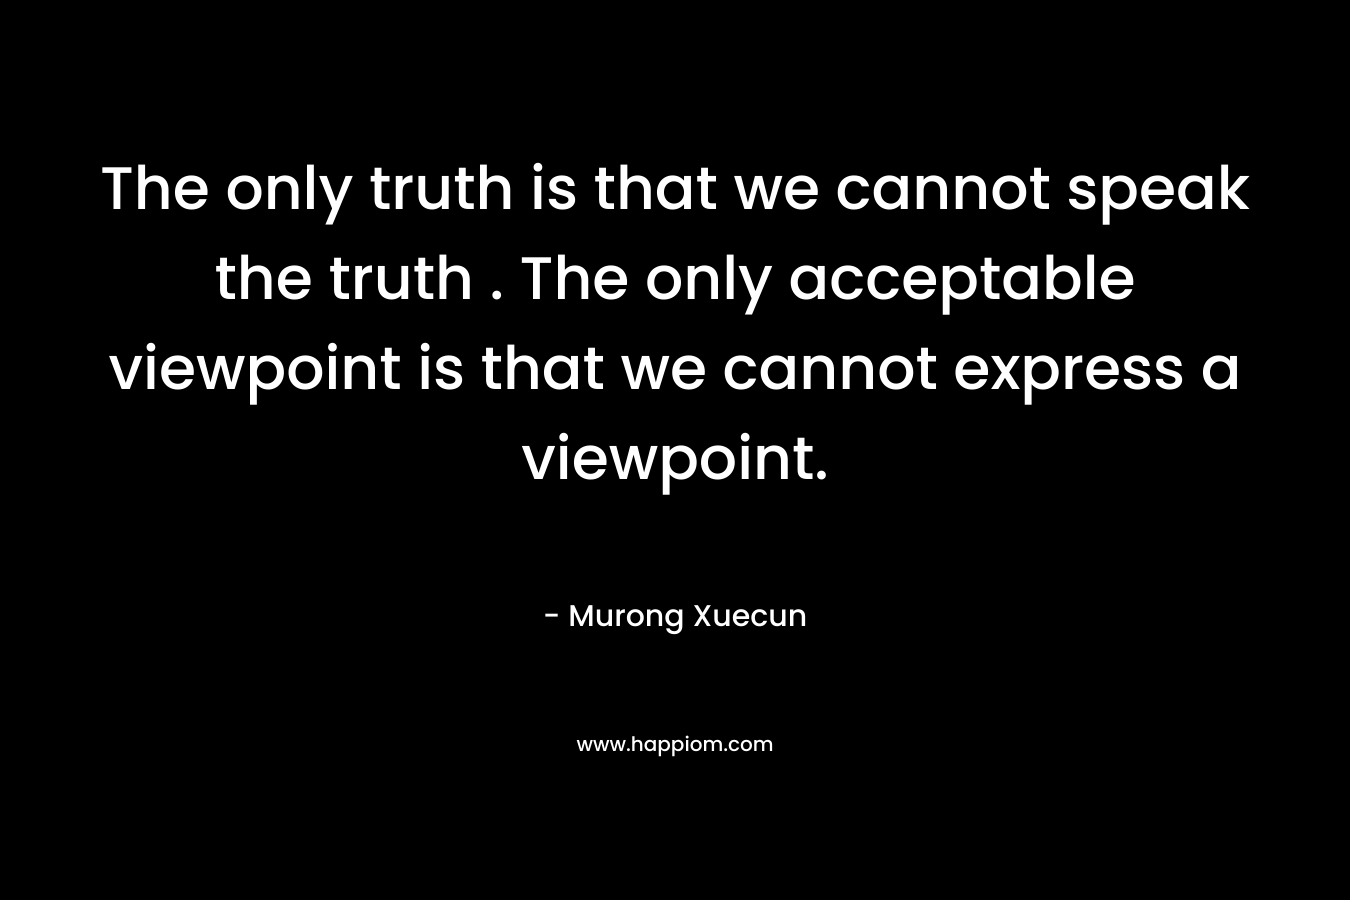 The only truth is that we cannot speak the truth . The only acceptable viewpoint is that we cannot express a viewpoint. – Murong Xuecun